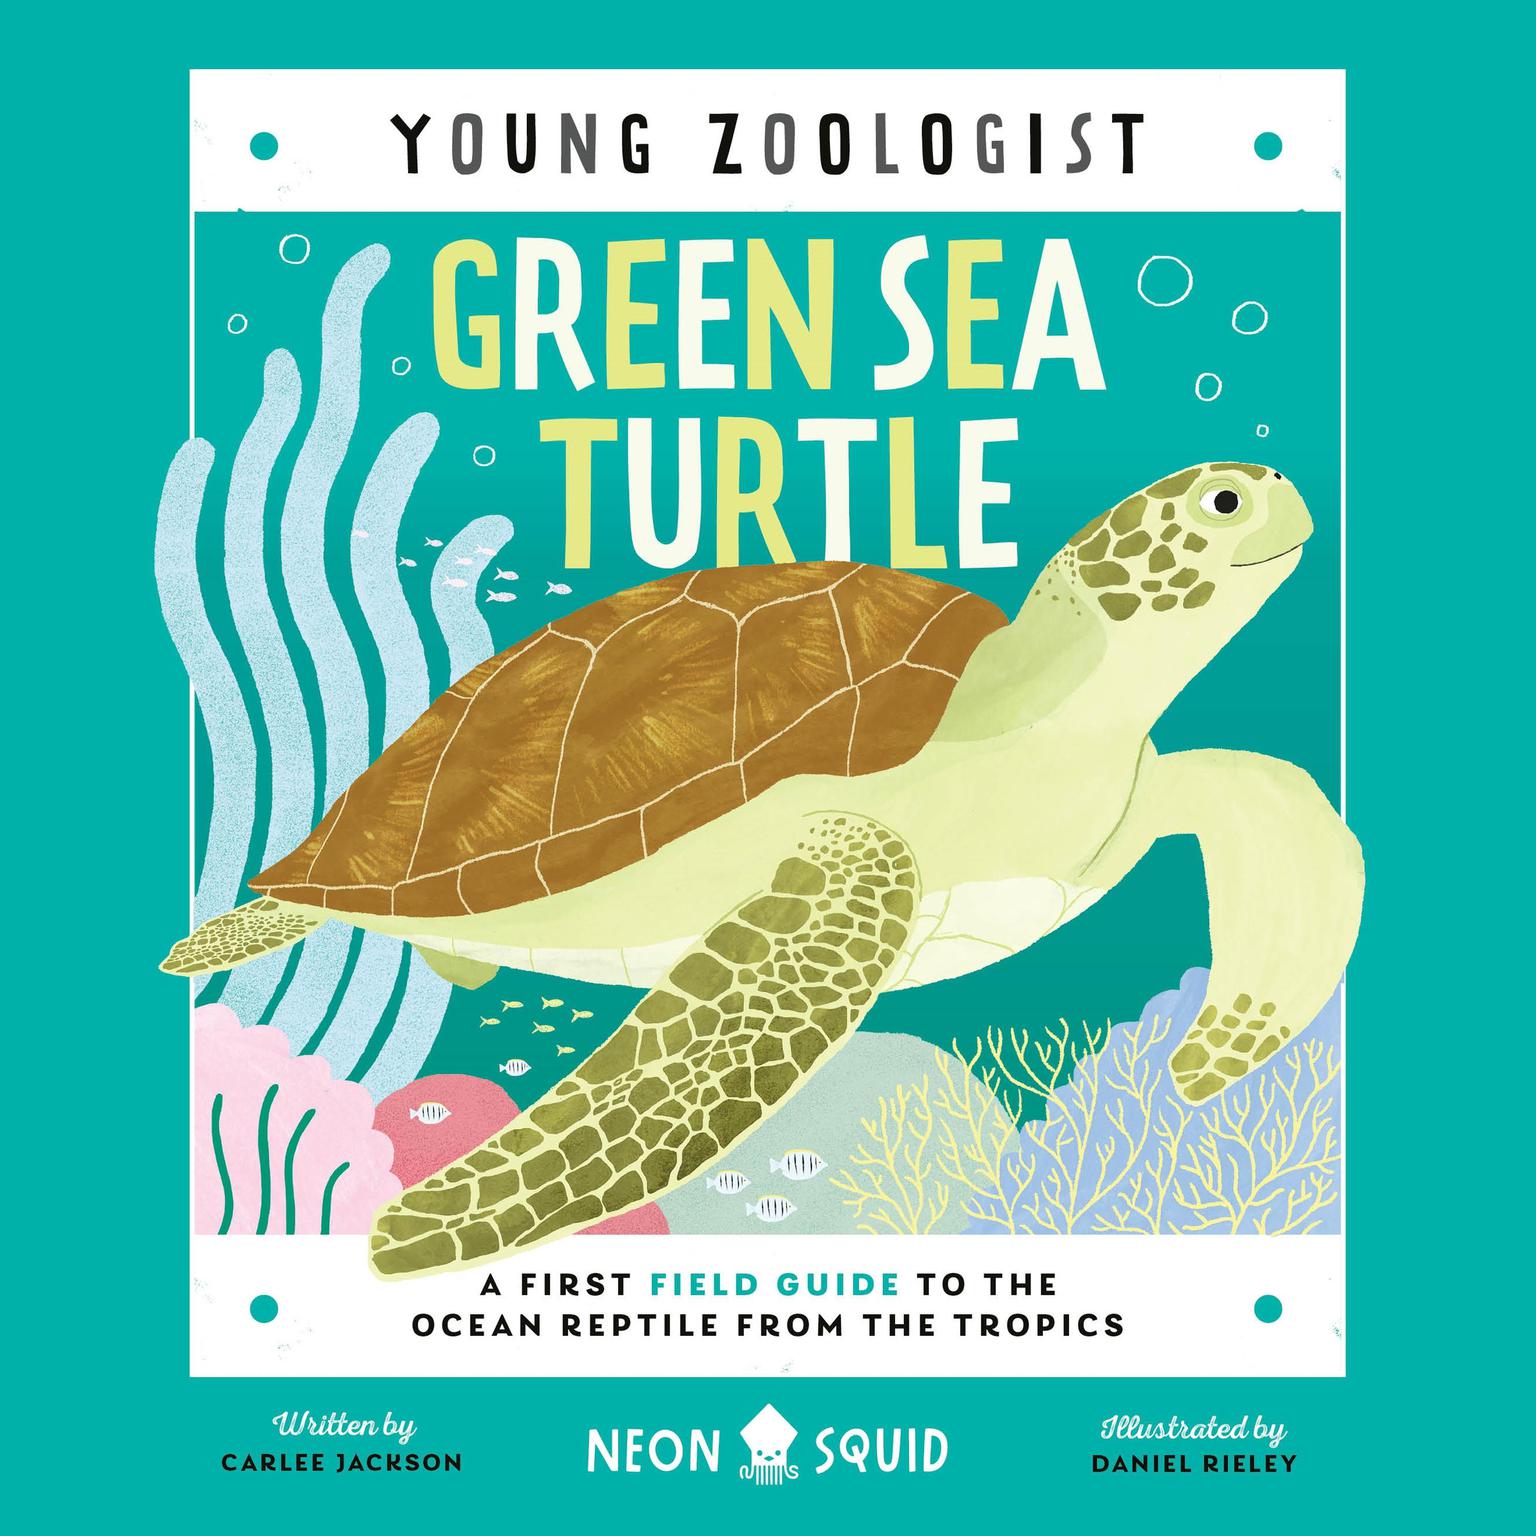 Green Sea Turtle (Young Zoologist): A First Field Guide to the Ocean Reptile from the Tropics Audiobook, by Carlee Jackson